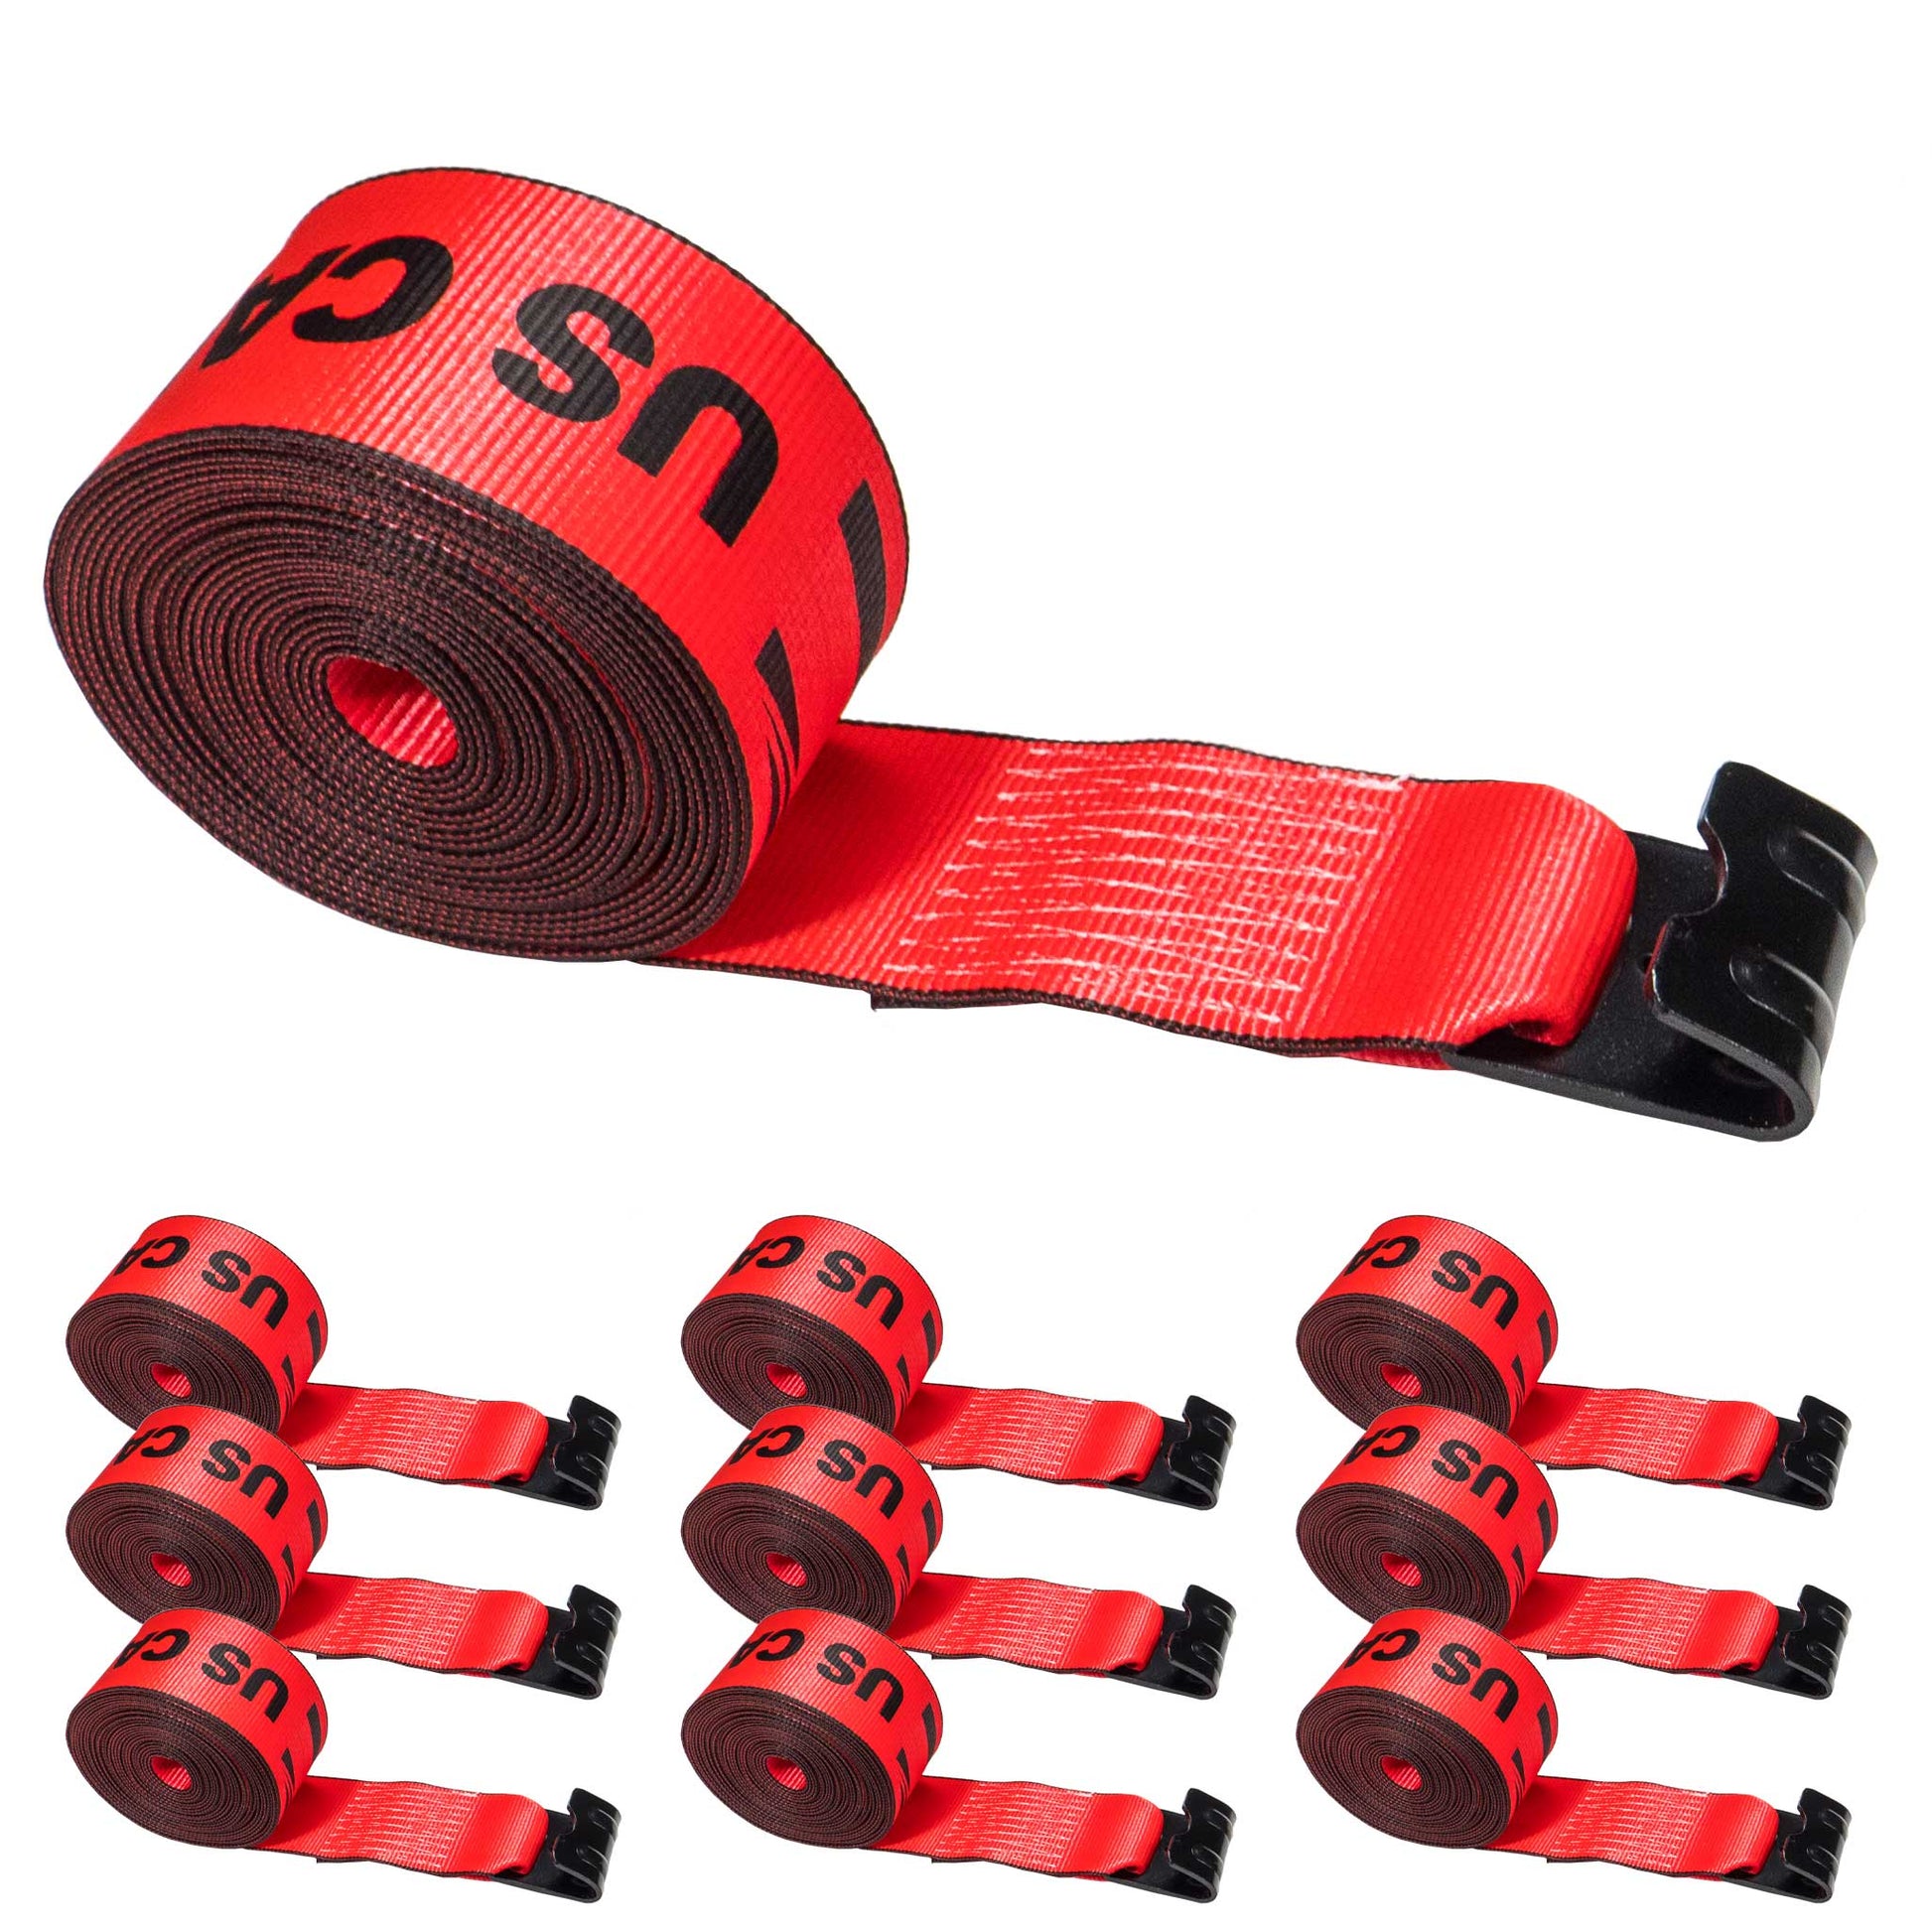 US Cargo Control 430Fh-R-Box 4 x 30' Red Winch Straps with Flat Hook